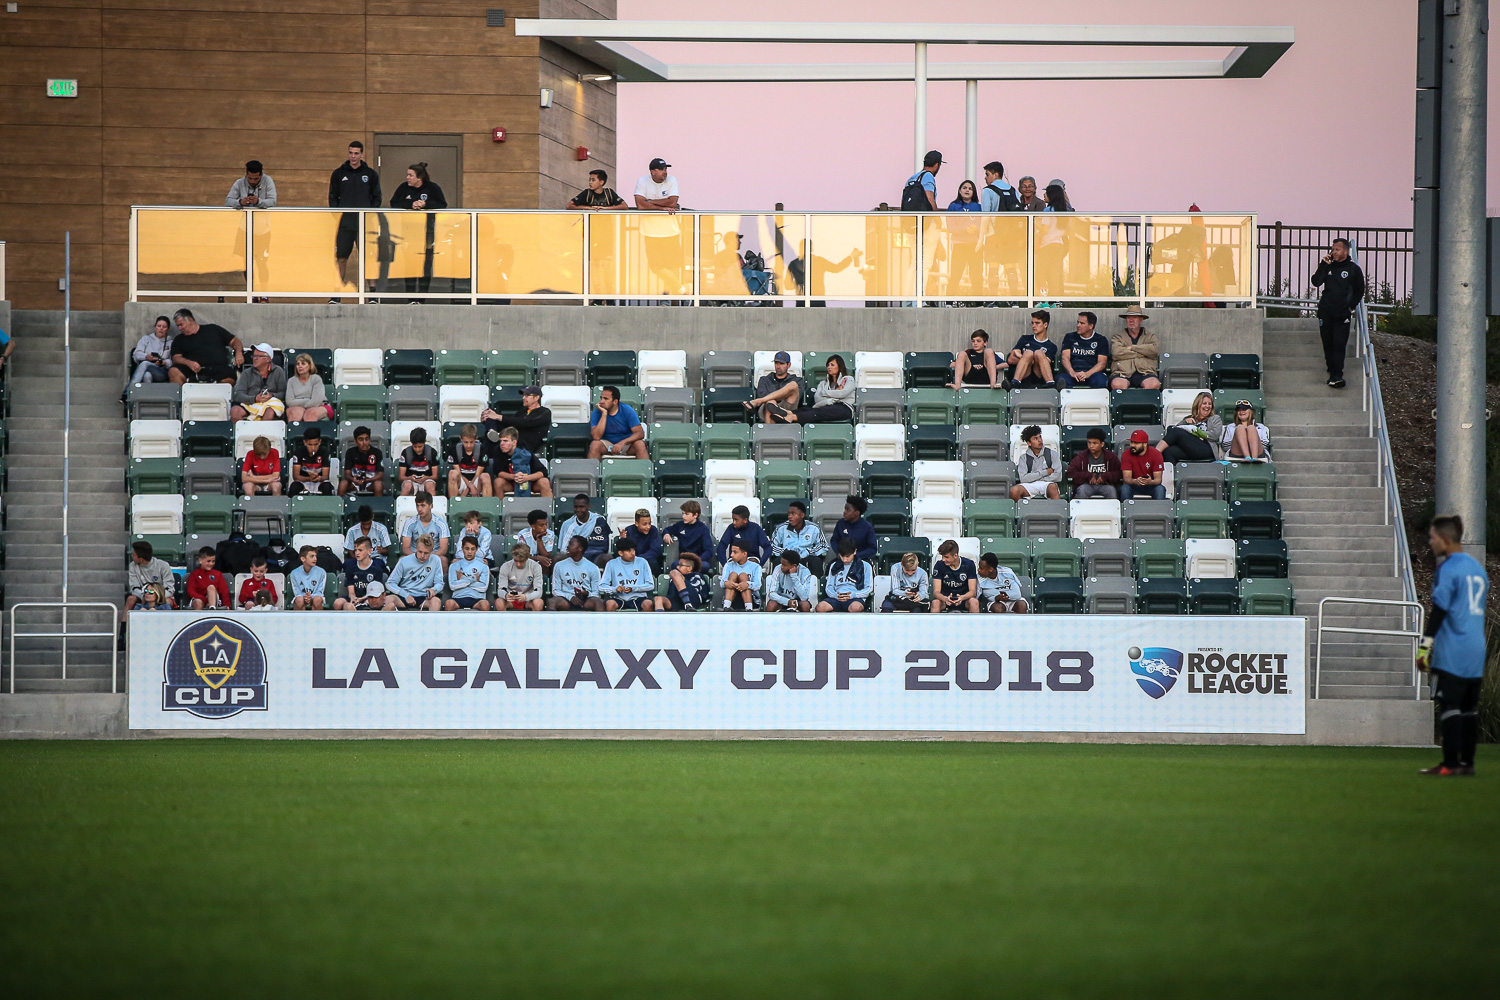 LA Galaxy Cup was created to offer a premier competition for Boys Development Academy teams.